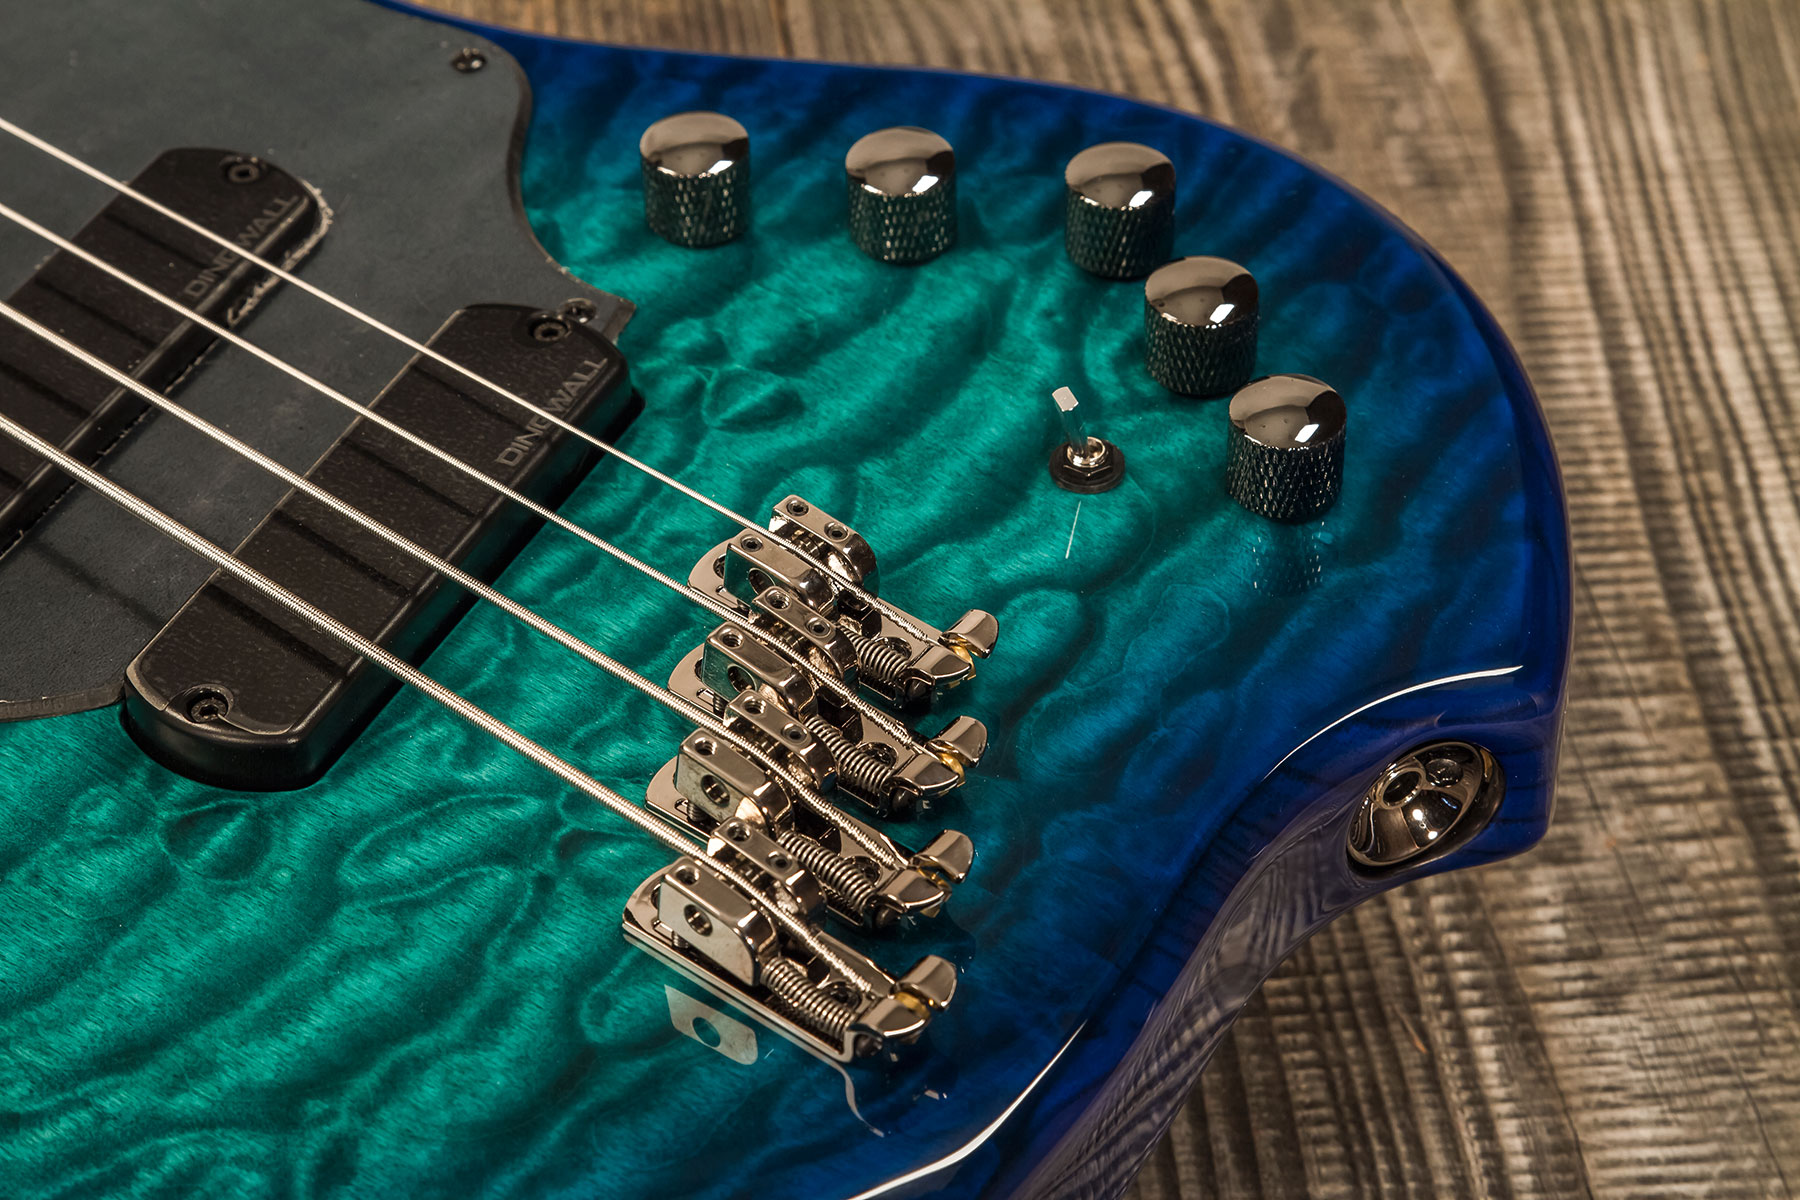 Dingwall Combustion Cb2 4c 2pu Active Pf - Whalepool Burst - Solid body electric bass - Variation 4